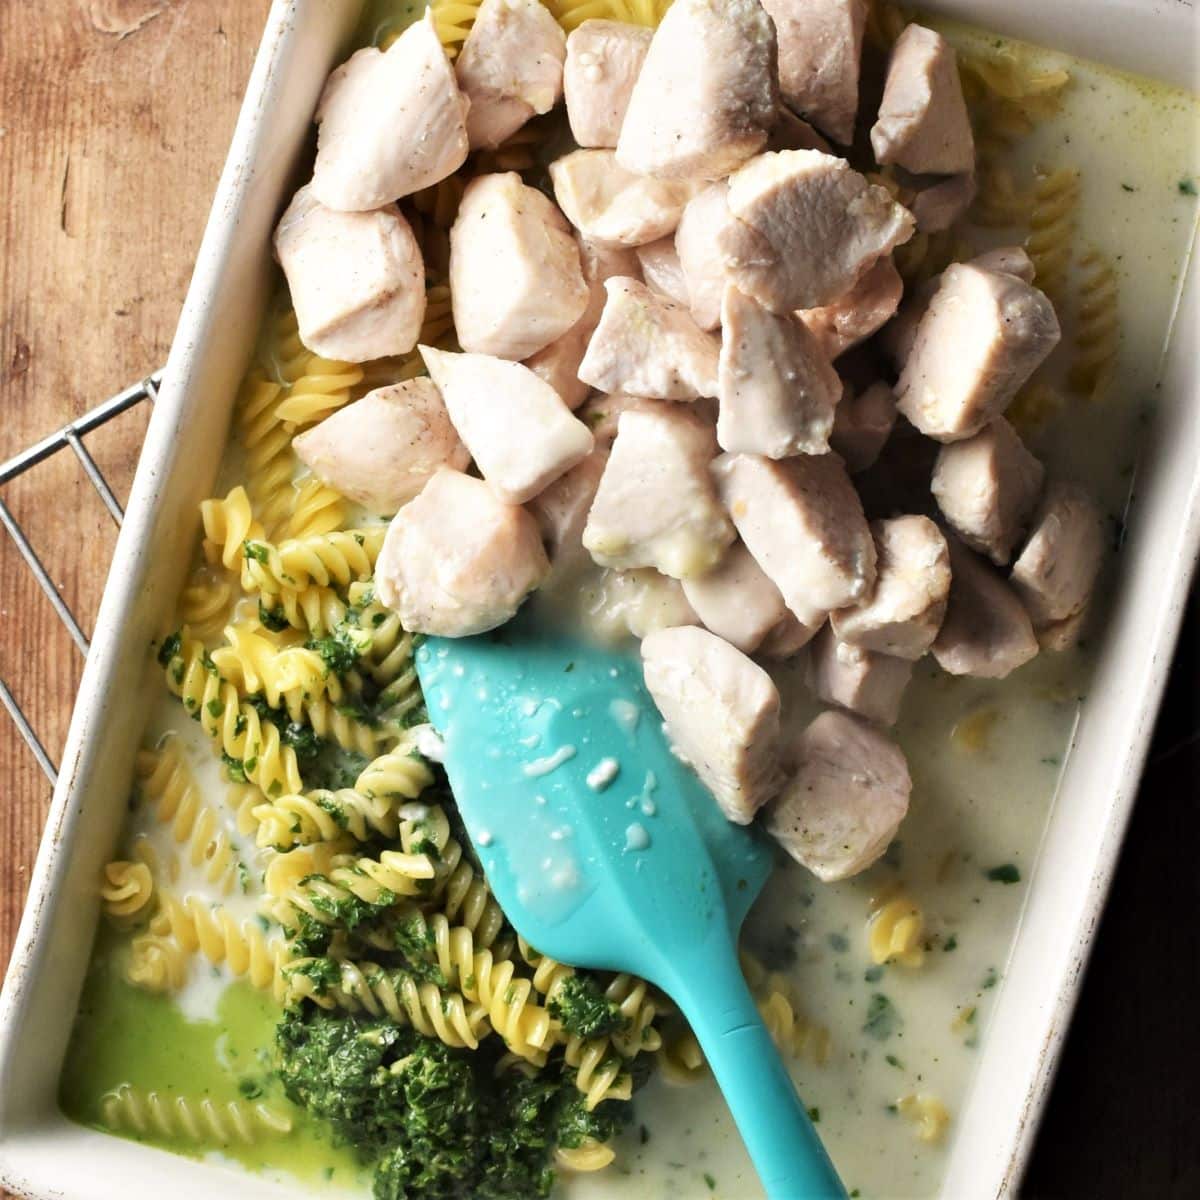 Assembling pesto pasta with chicken and creamy sauce in rectangular dish with blue spatula.